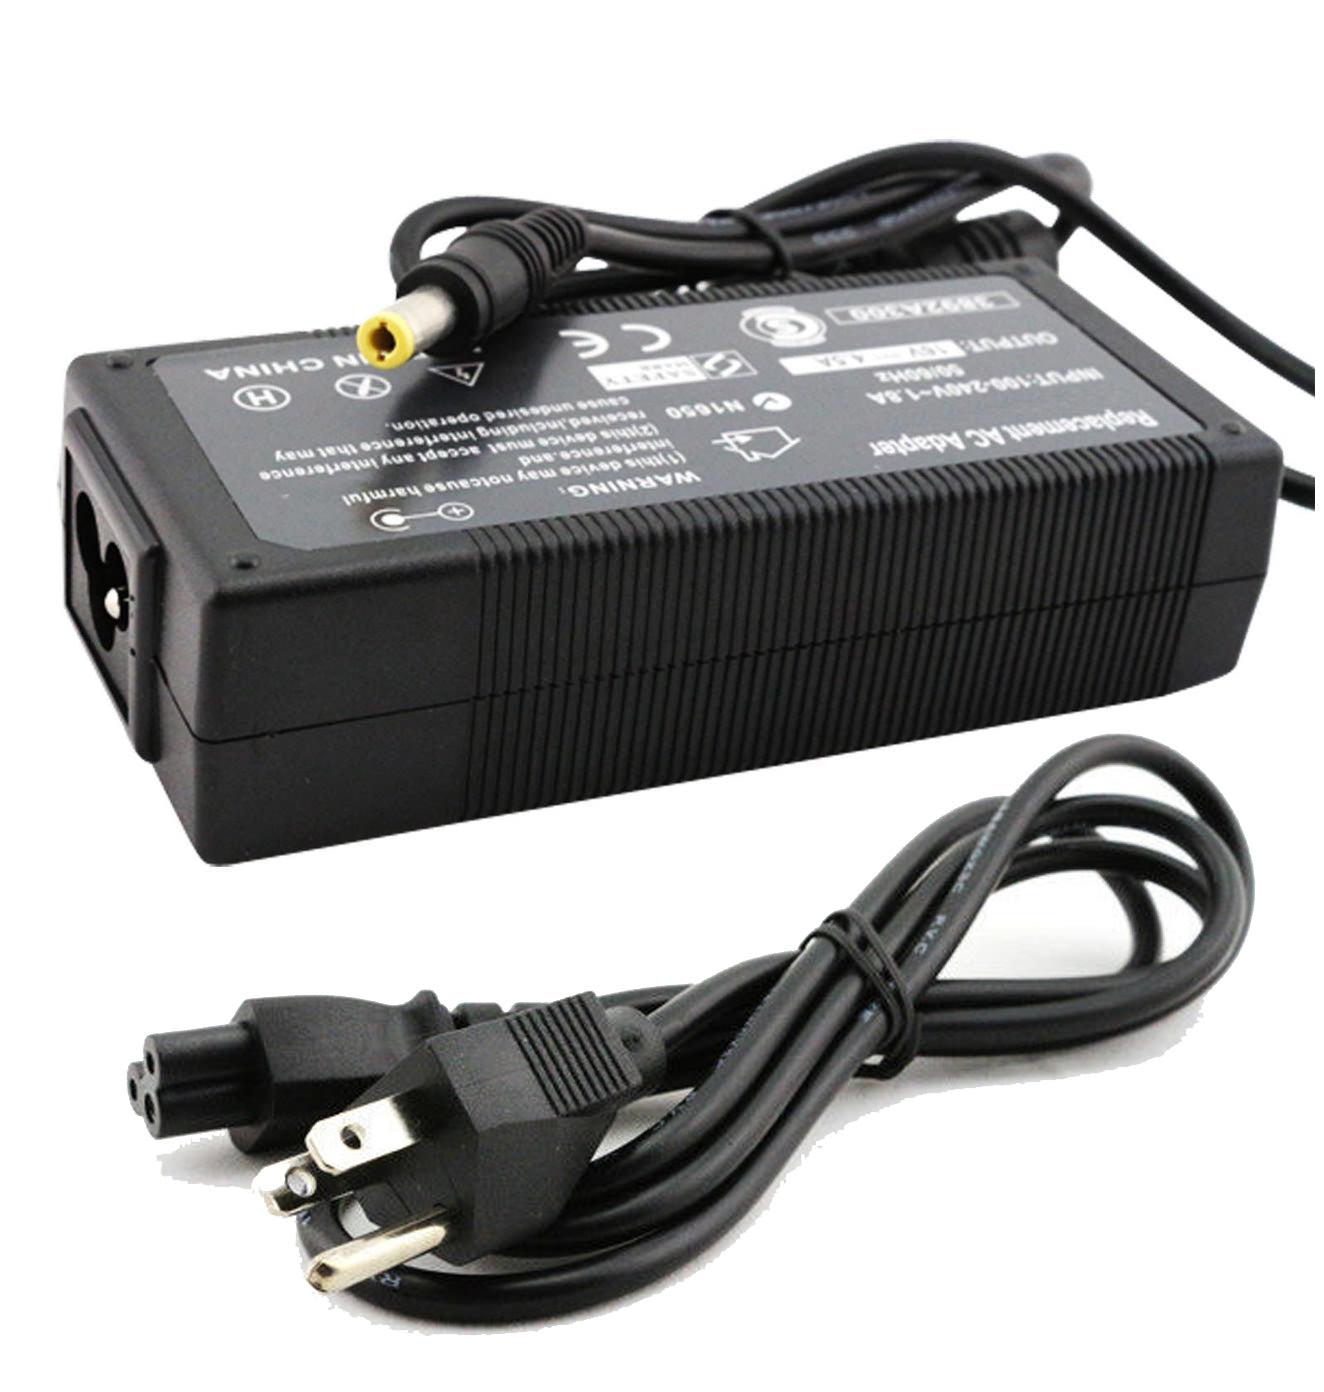 AC Adapter Charger for IBM ThinkPad X40 Notebook.